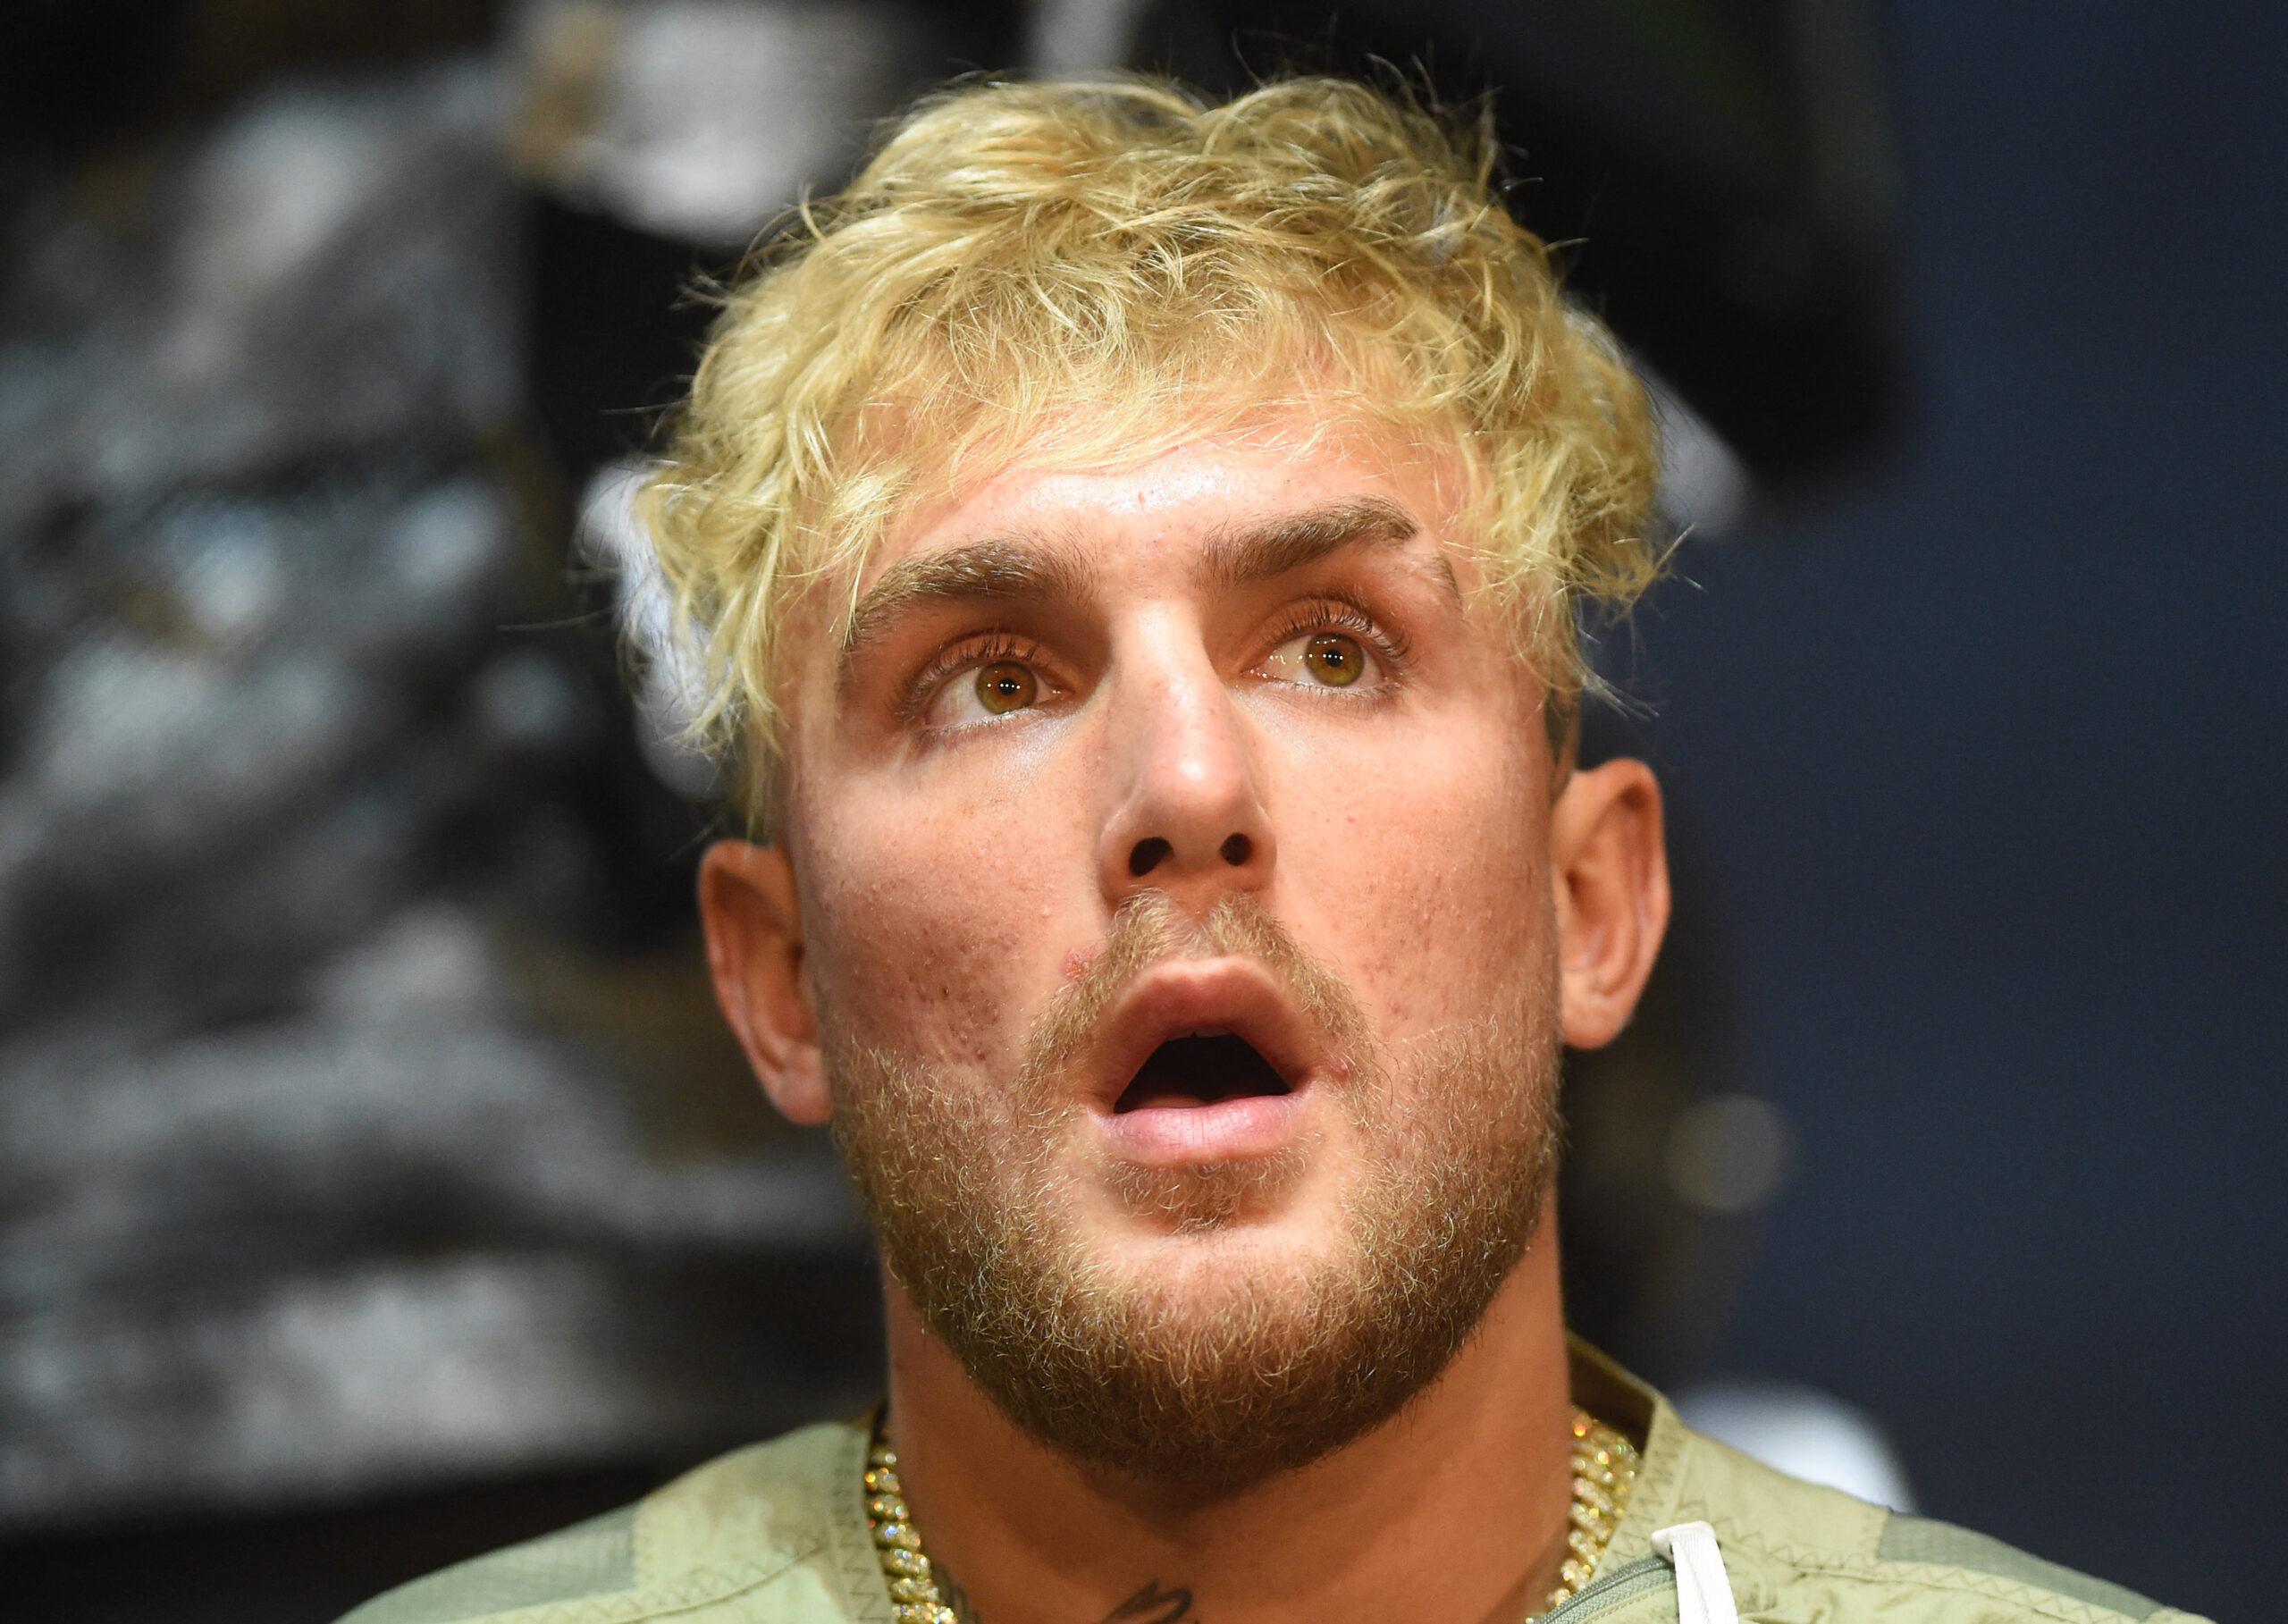 Jake Paul at Tyron Woodley Los Angeles Press conference